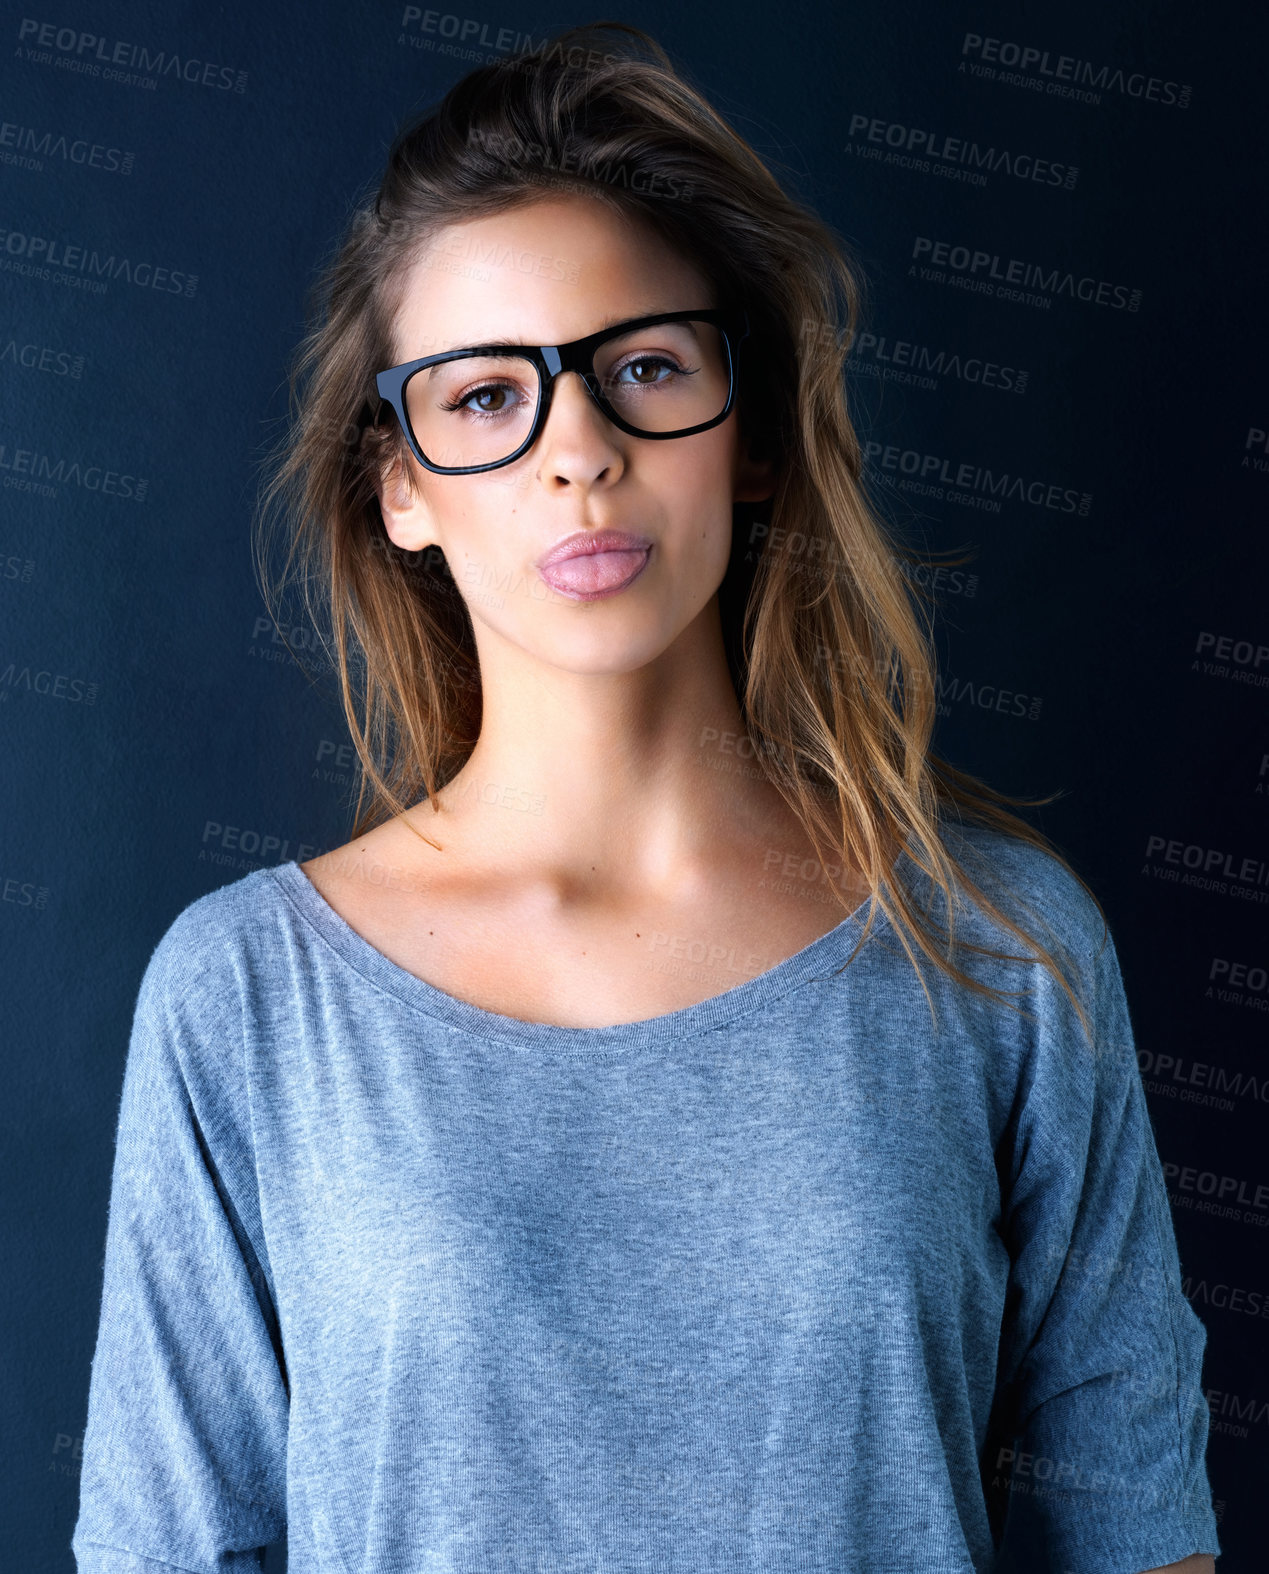 Buy stock photo Studio portrait of a cute teenage girl in glasses sticking out her tongue posing against a dark background